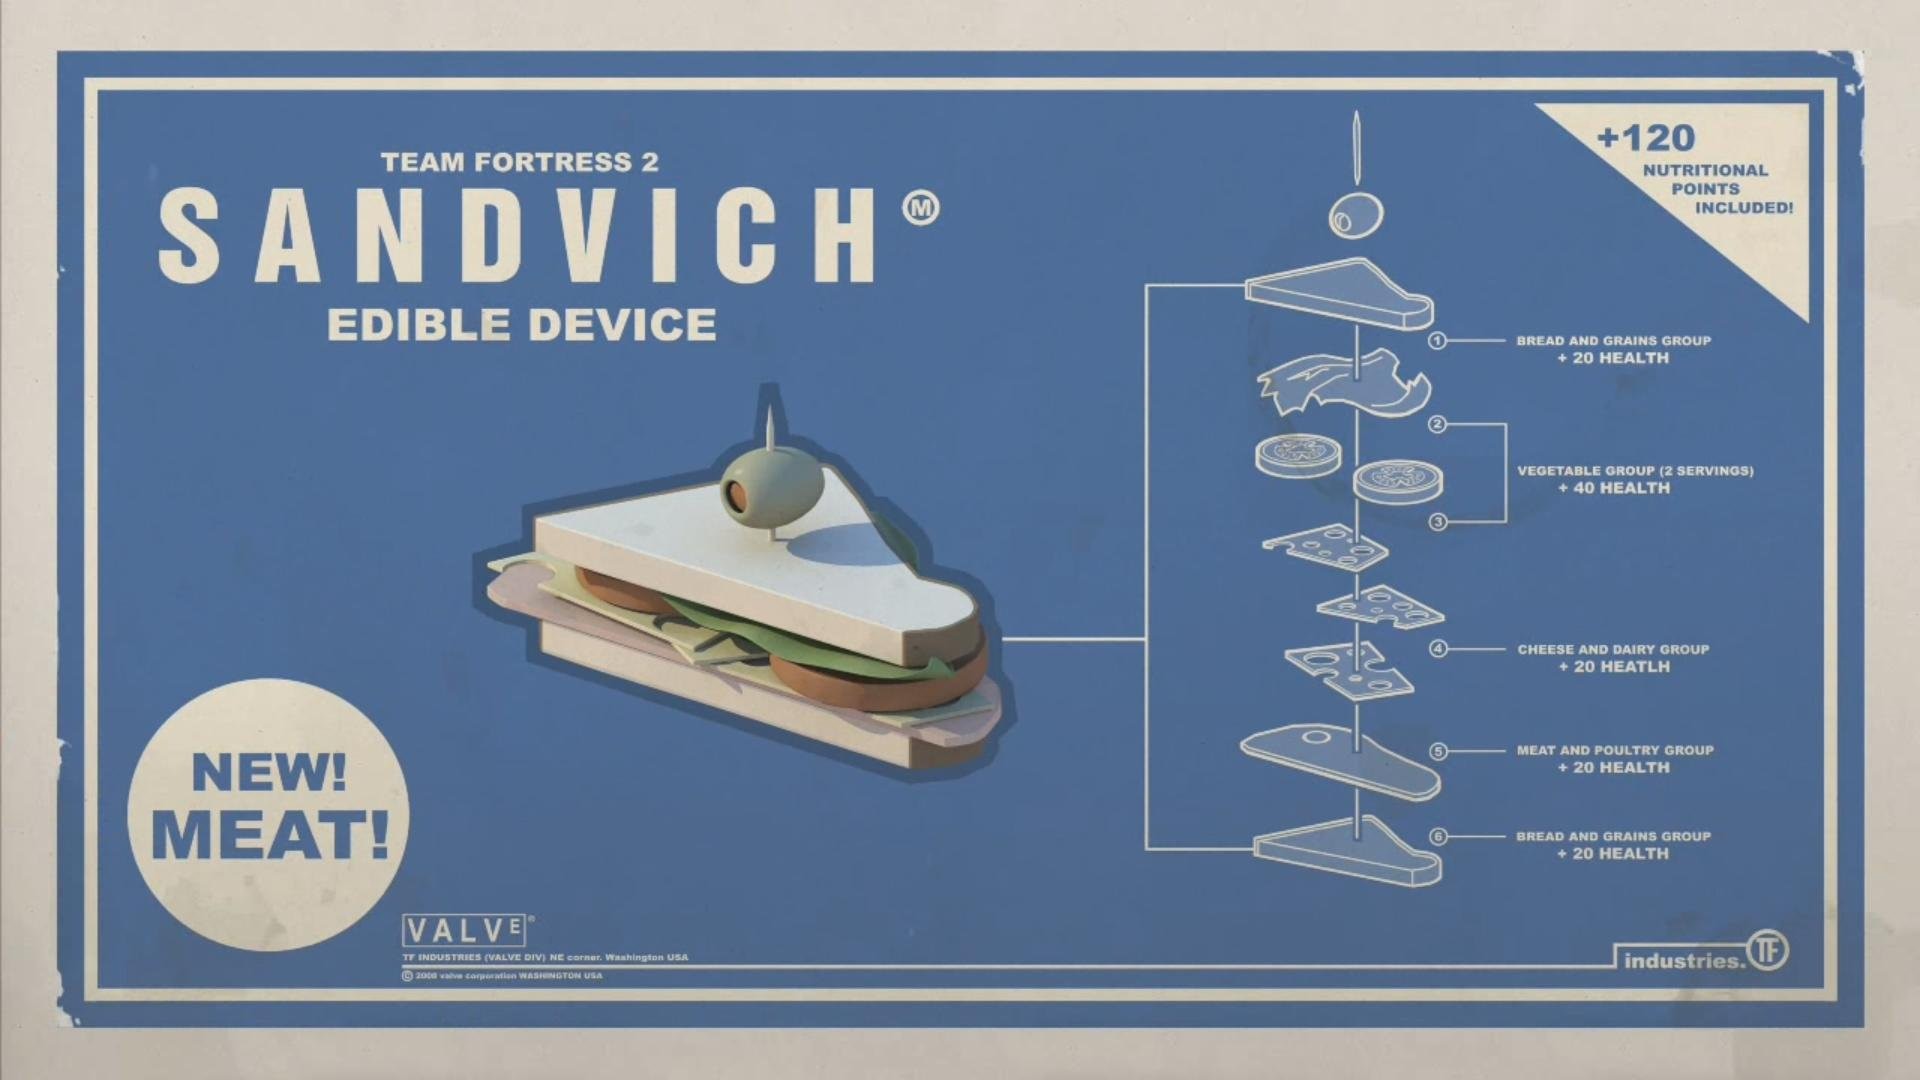 1920x1080 ... wallpapers hd; funny heavy sandvich sandwiches team fortress 2  walldevil ...